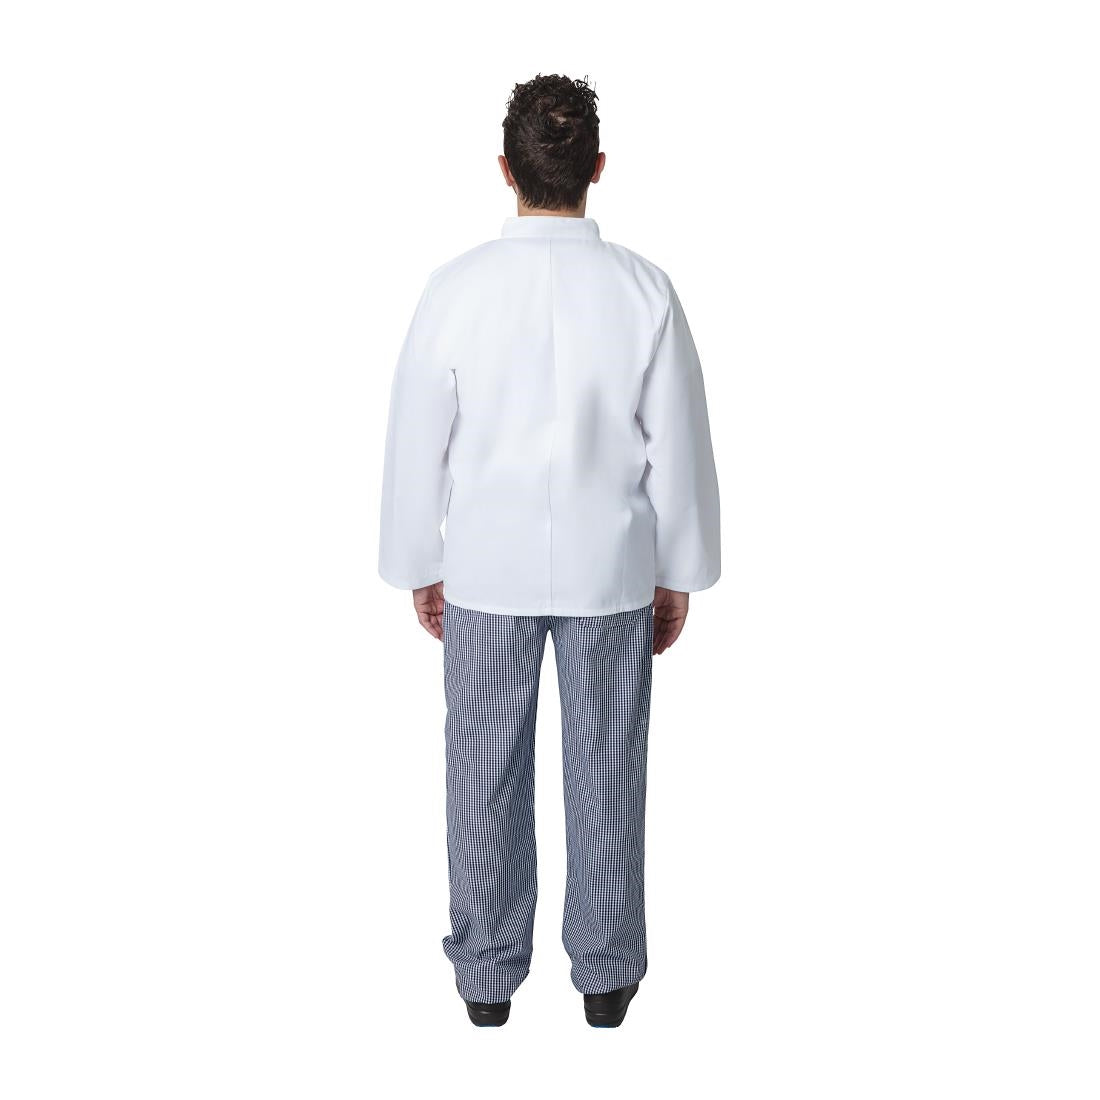 A134-XL Whites Vegas Unisex Chefs Jacket Long Sleeve White XL JD Catering Equipment Solutions Ltd